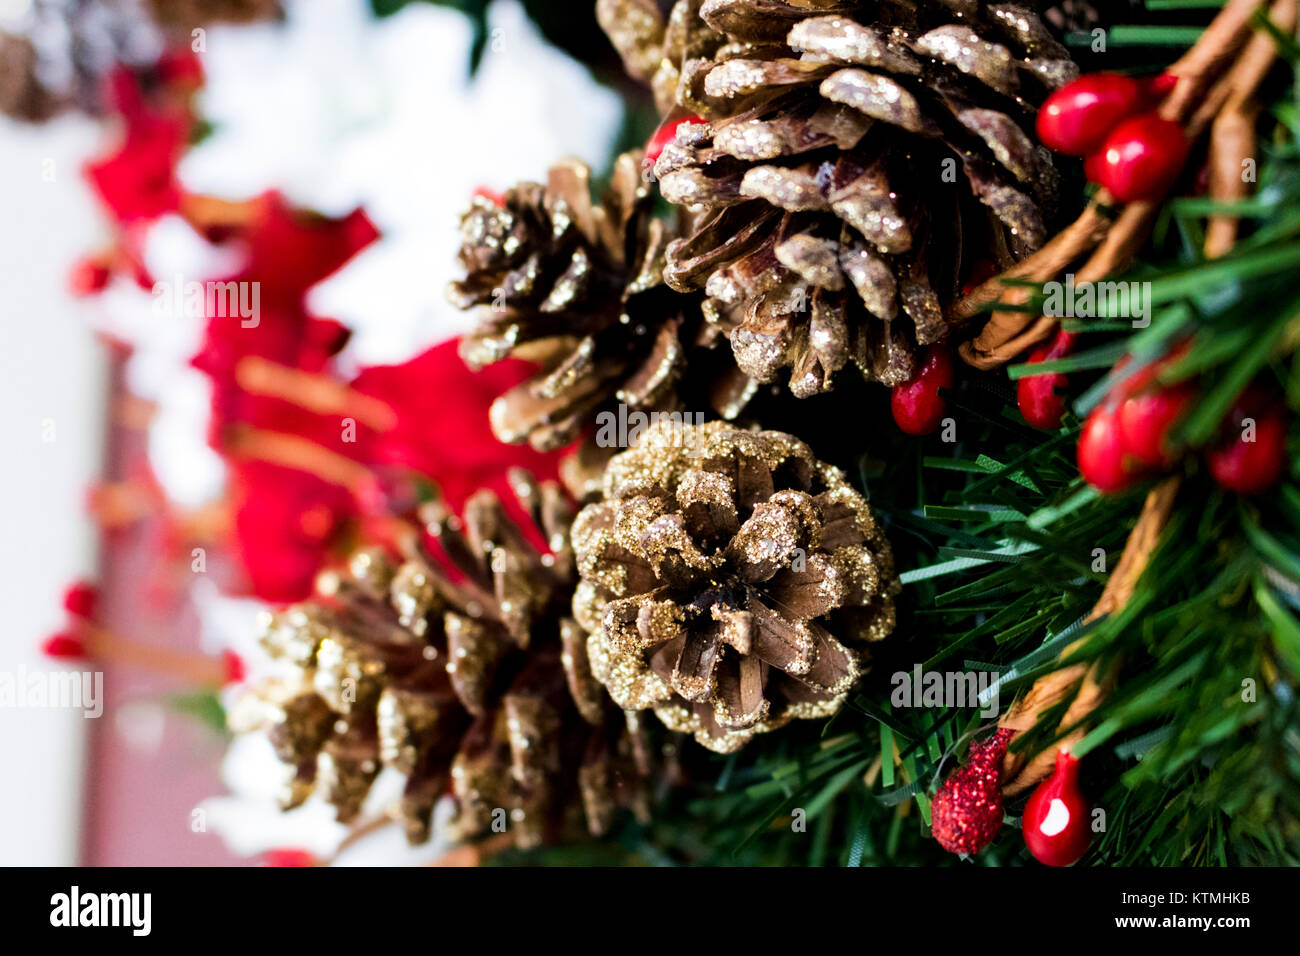 Pine Cones on a Christmas Holiday Wreath Stock Photo